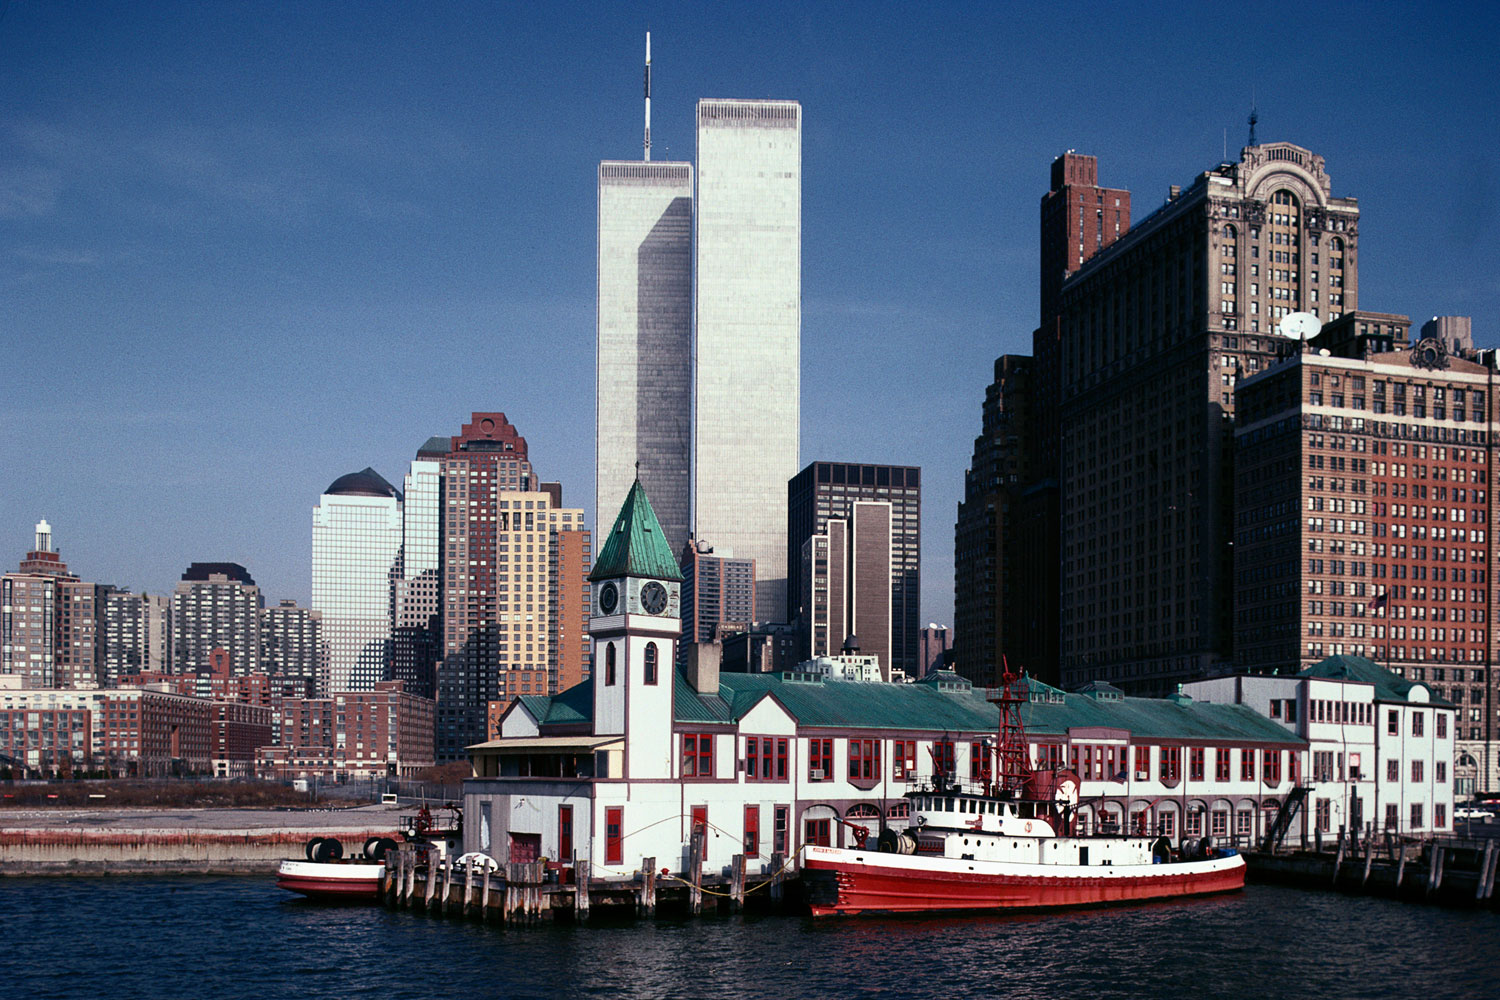 View from the Statue of Liberty Ferry, January, 1992.